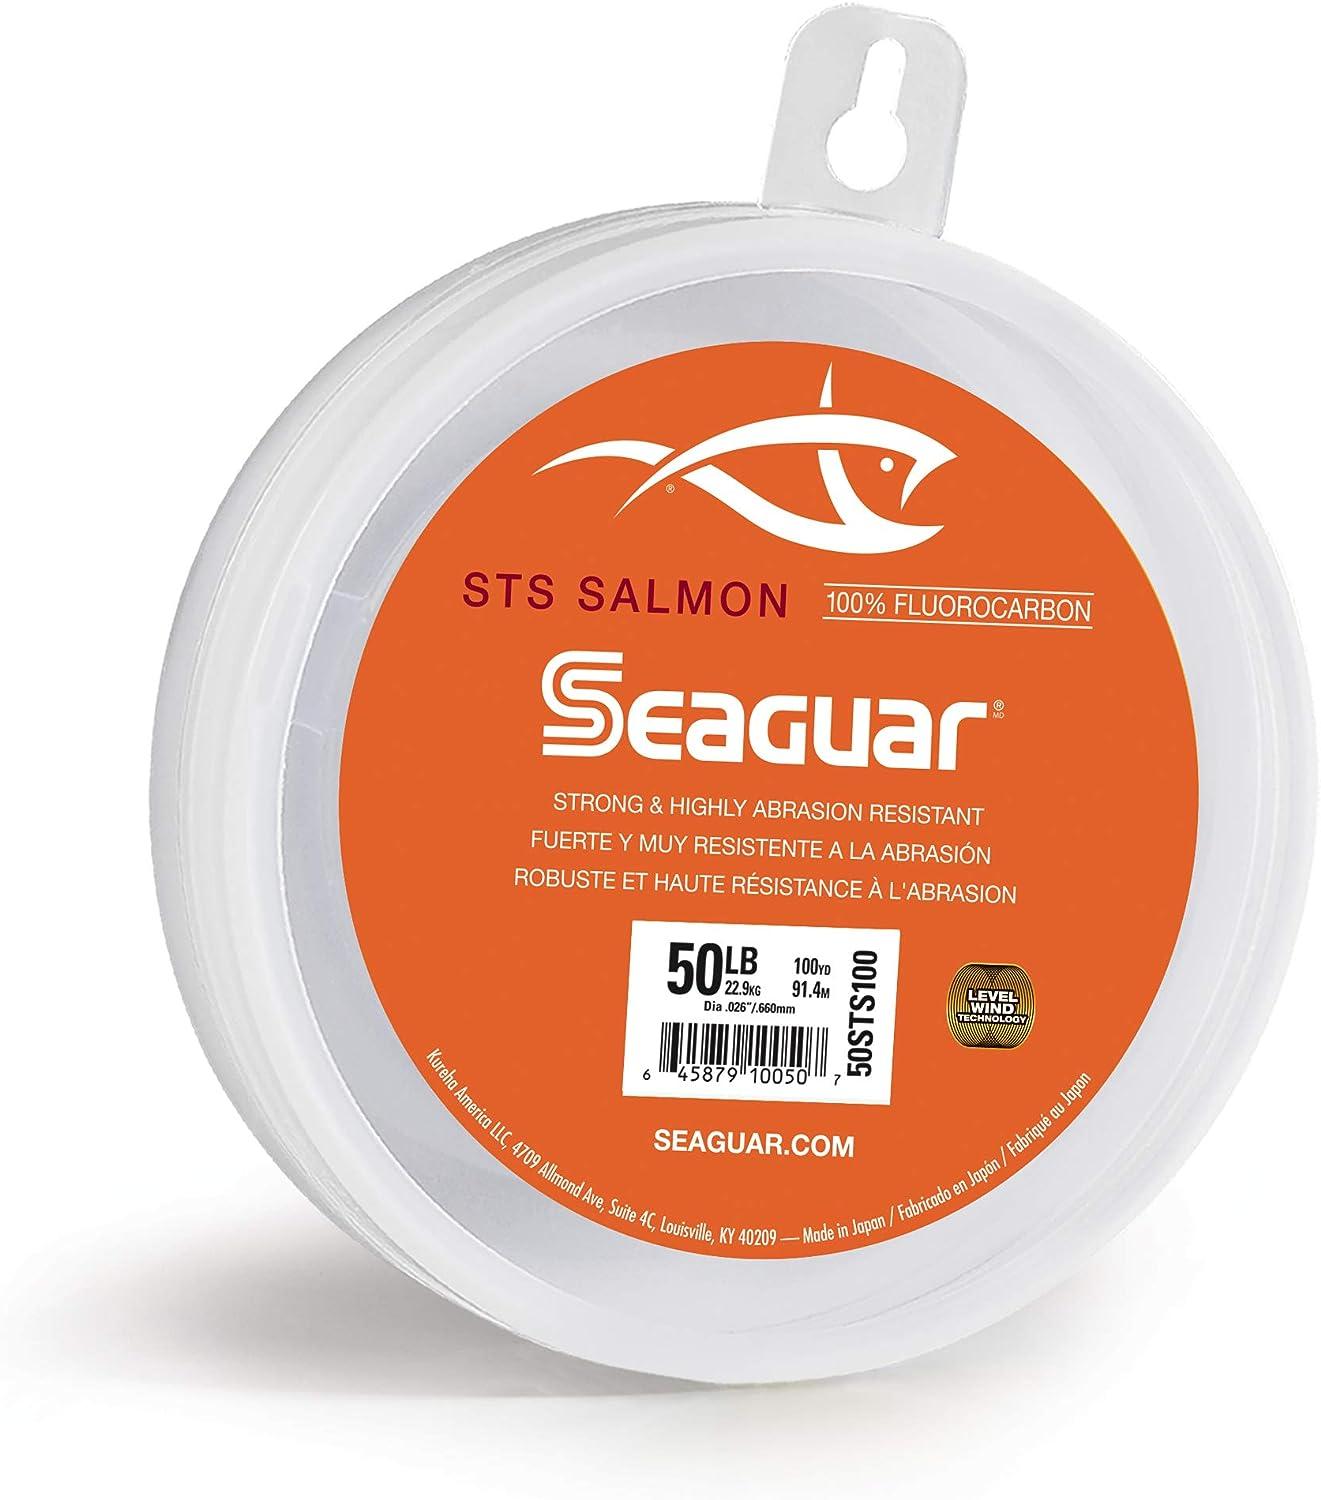 Seaguar STS Salmon Fishing Line, Strong and Abrasion Resistant, Premium  100% Fluorocarbon Performance Fishing Leader, Virtually Invisible 40 lb  100yd Clear